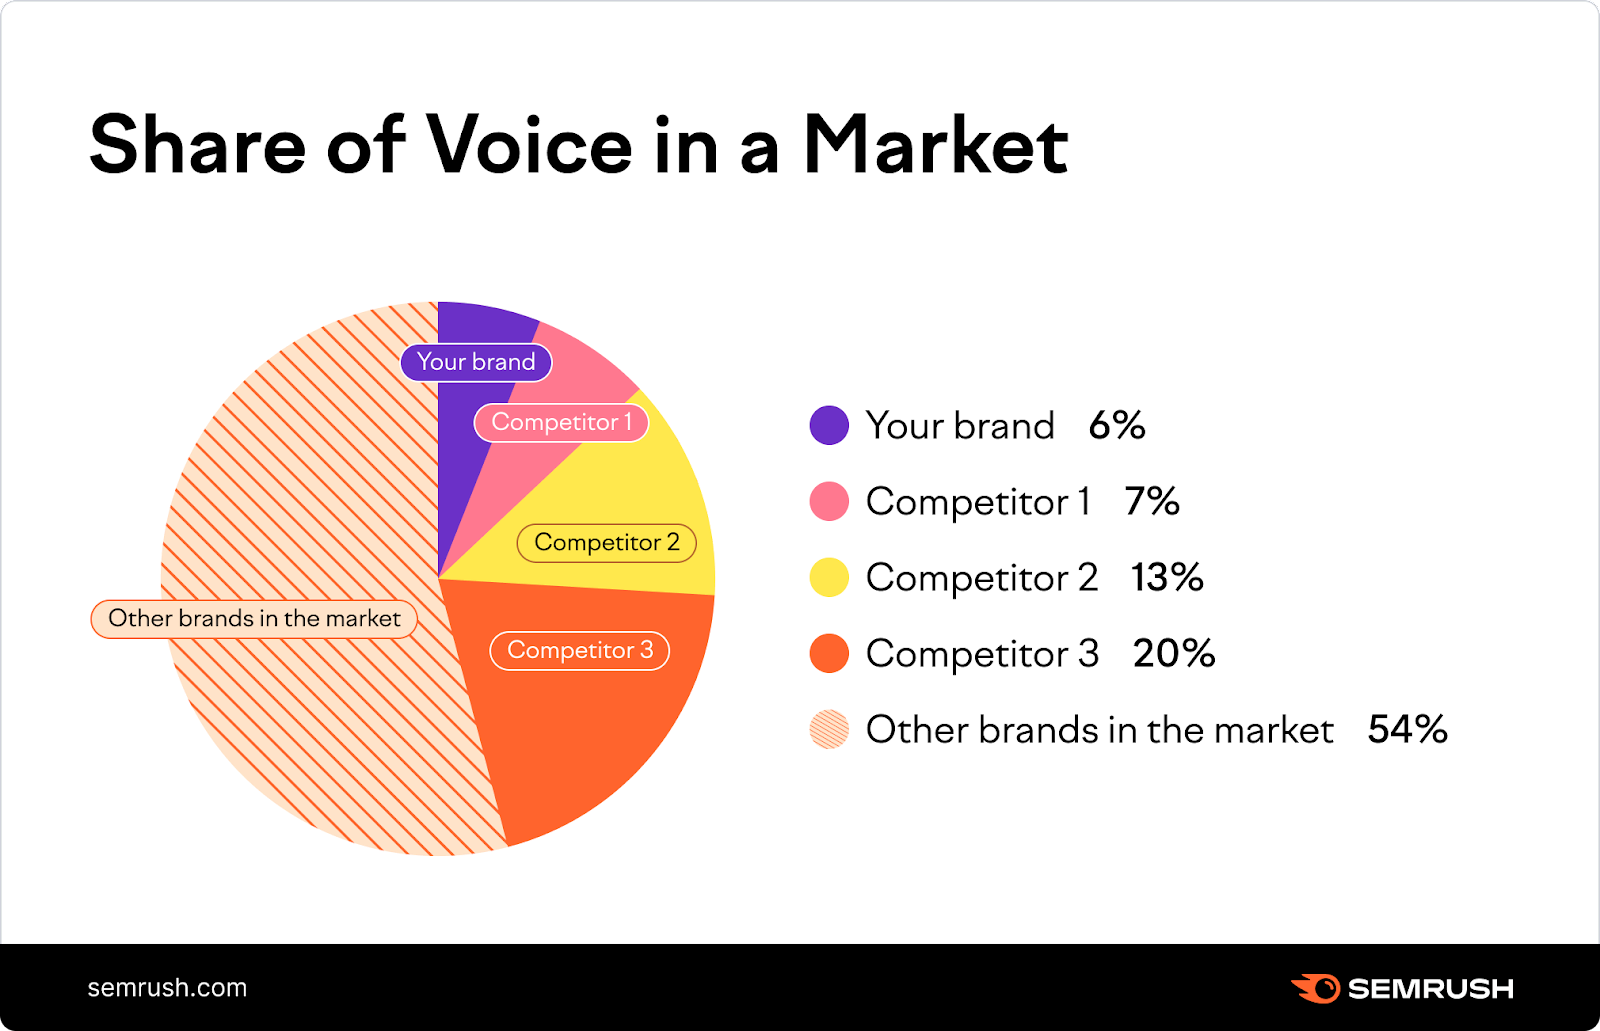 "Share of a Voice in a Market" infographic